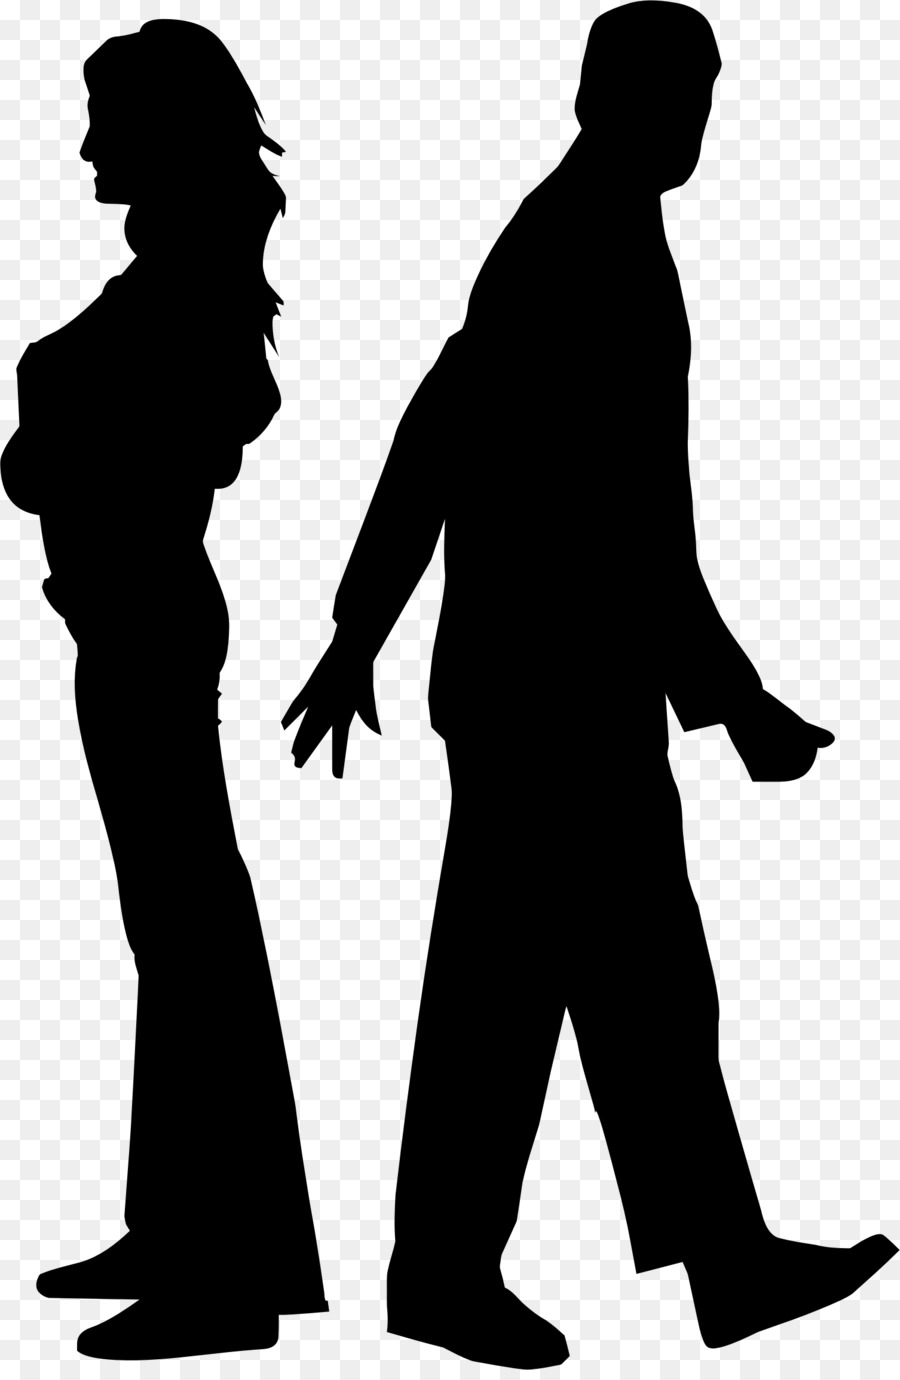 Silhouette couple Marriage - Fighting PNG Picture png download - 1506*2293 - Free Transparent Silhouette png Download.